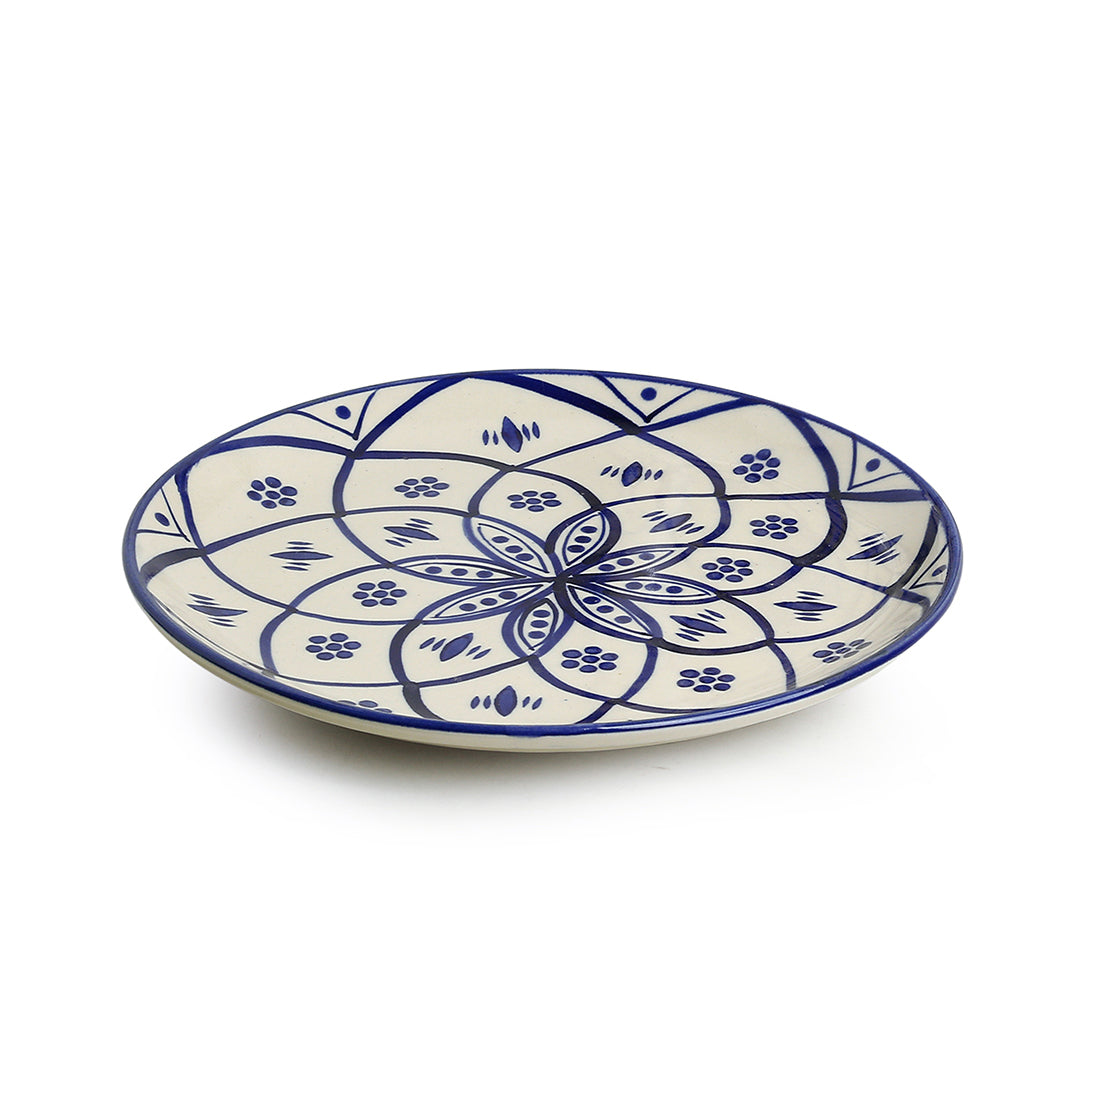 'Moroccan Floral' Handpainted Studio Pottery Dinner Plates In Ceramic (10 Inch, Set of 2, Microwave Safe)